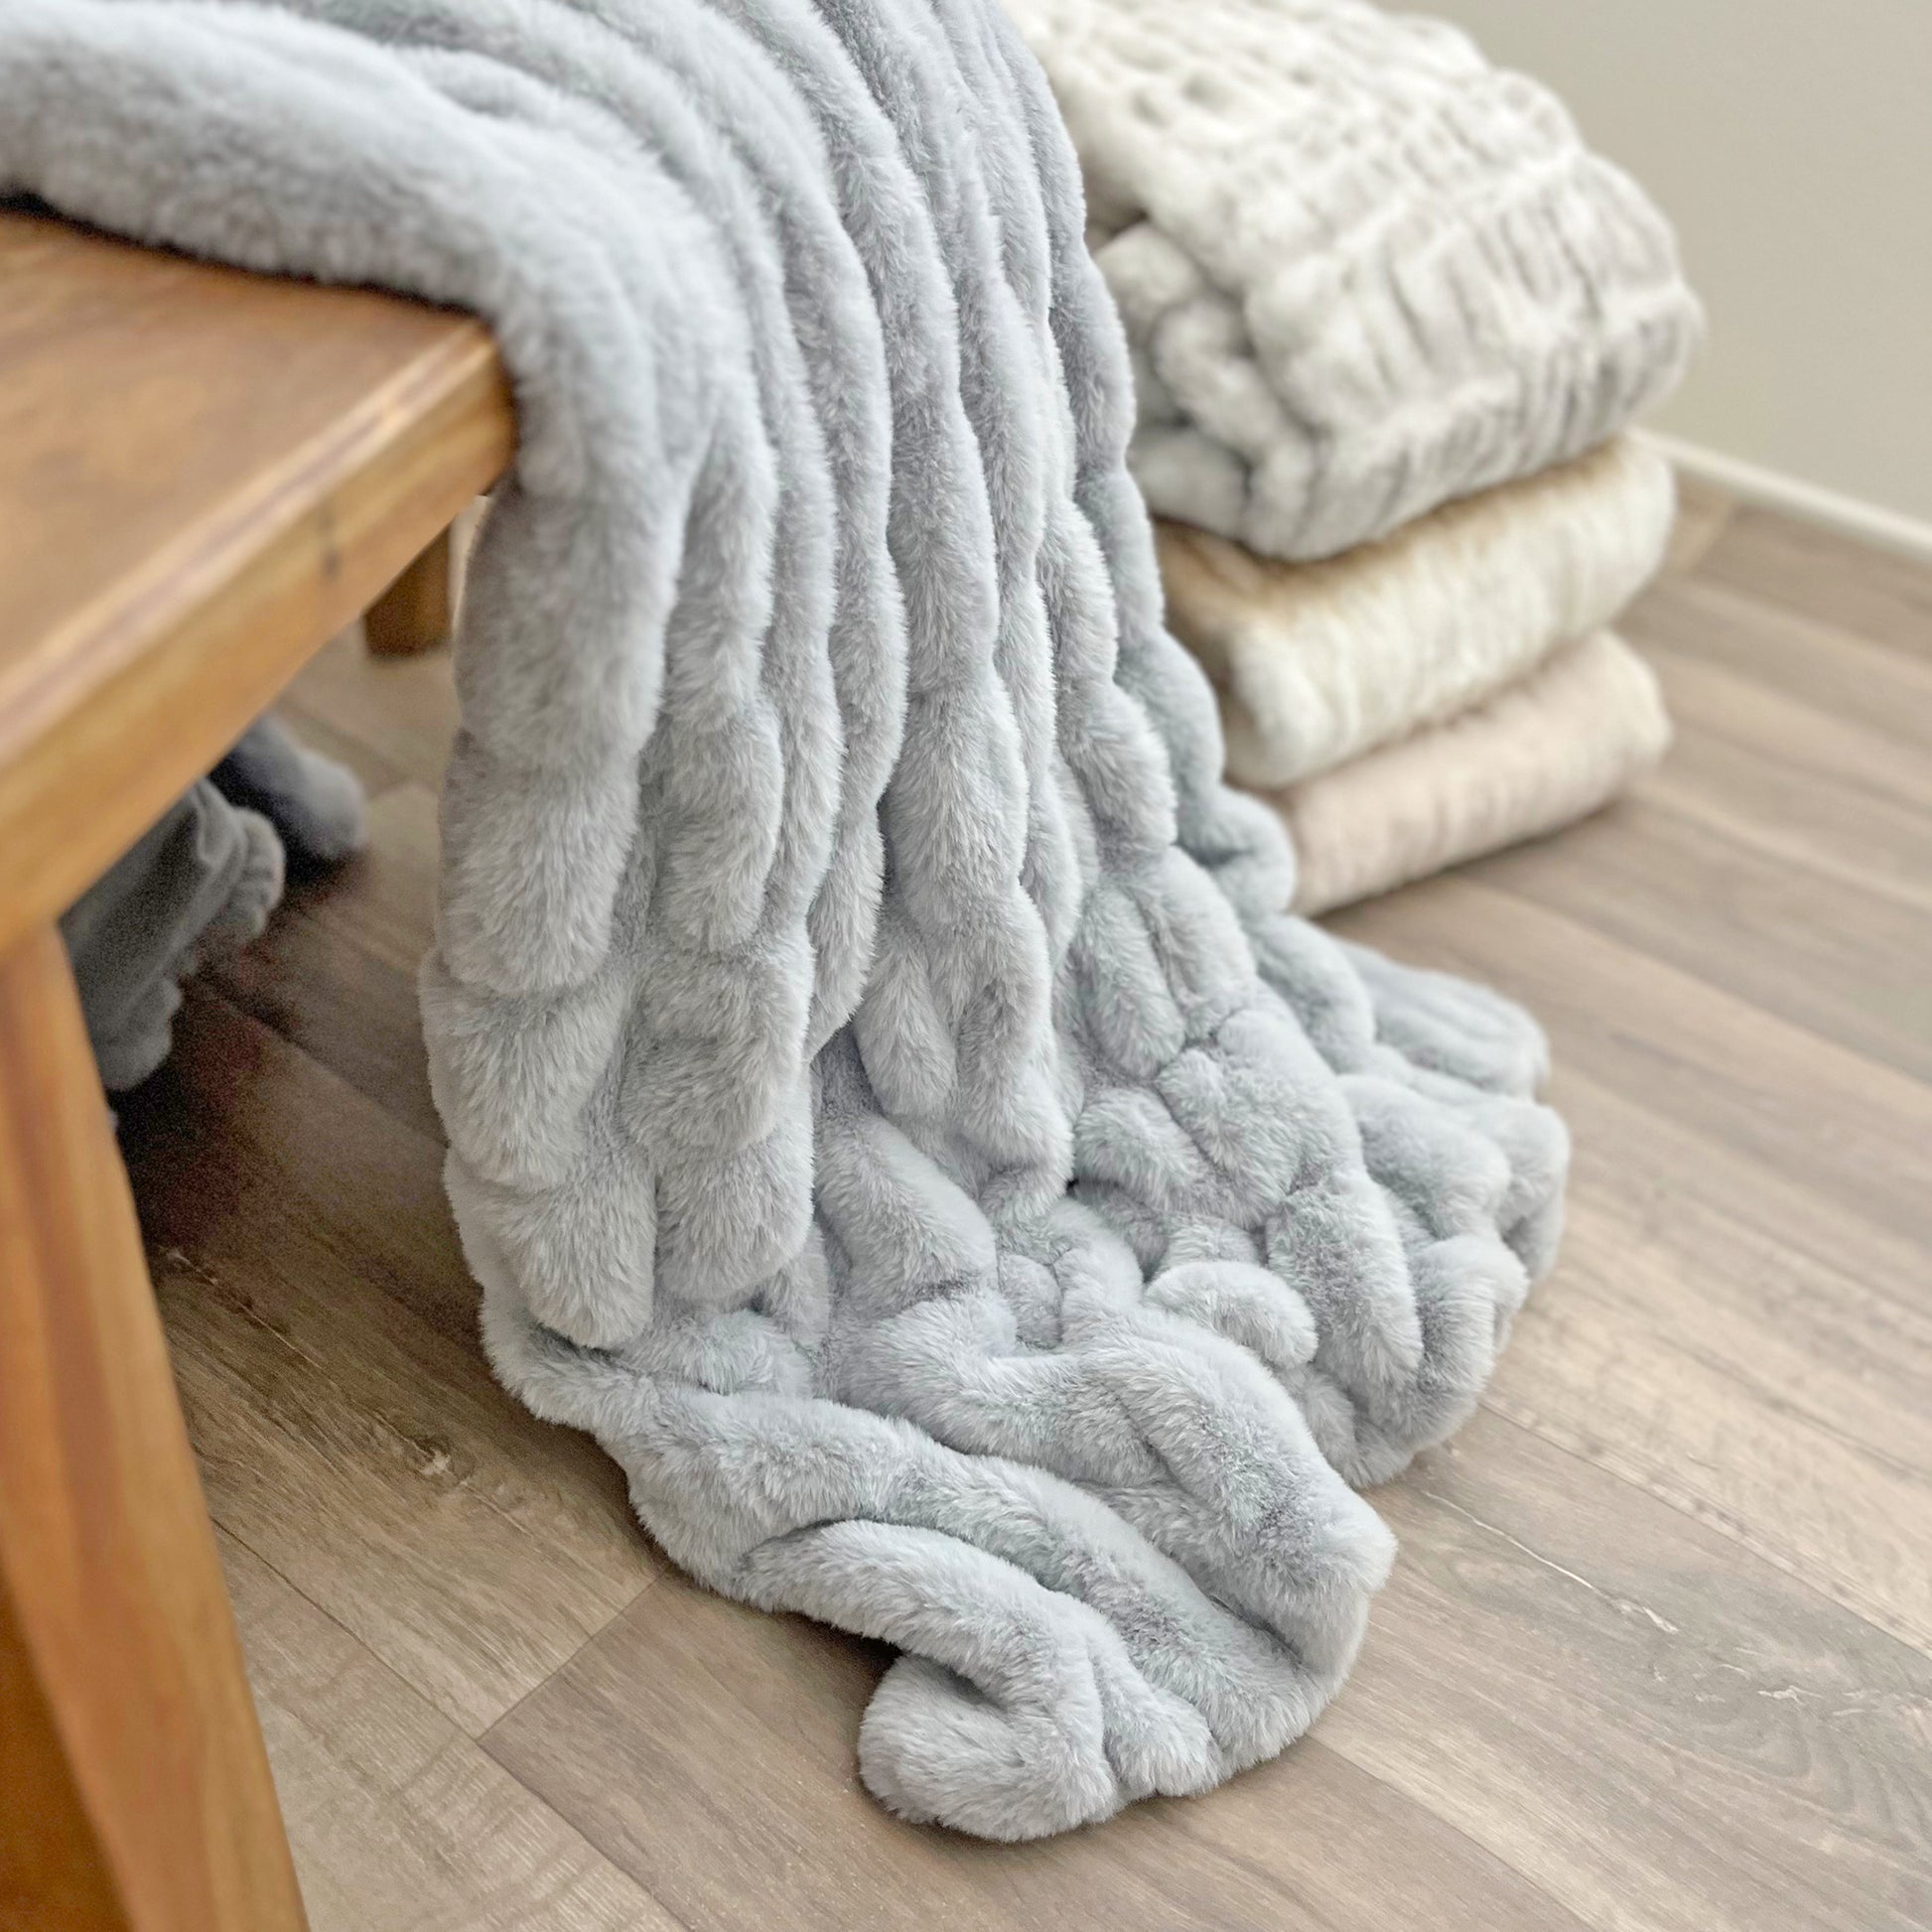  The Mood Mallow Faux Fur Throw, 50x60 in., Arctic Gray